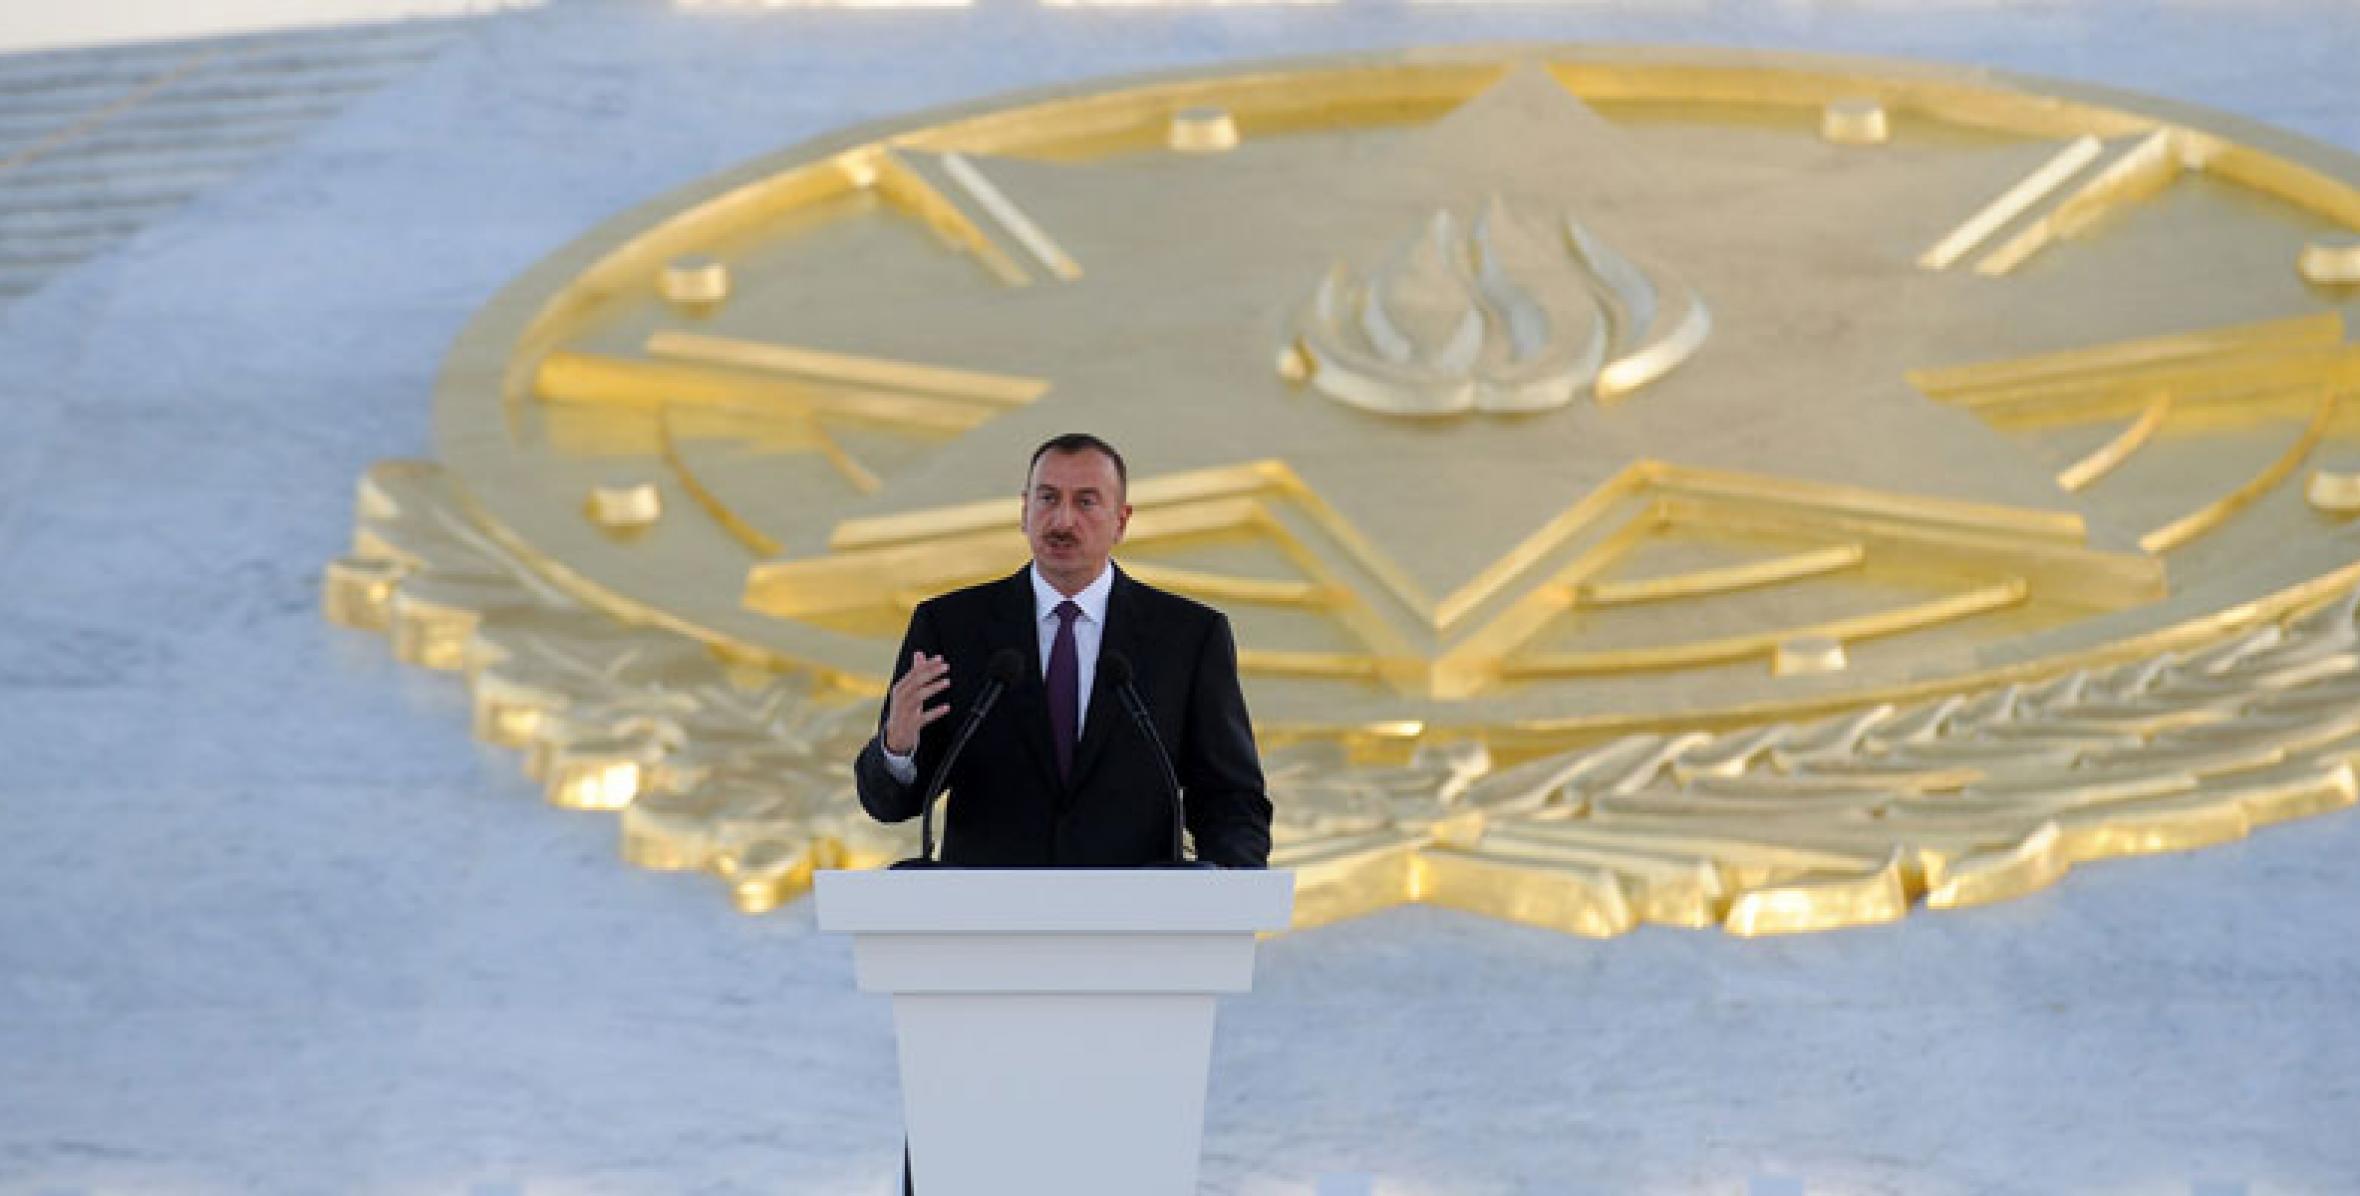 Speech by President Ilham Aliyev at a ceremony to inaugurate the State Flag Square